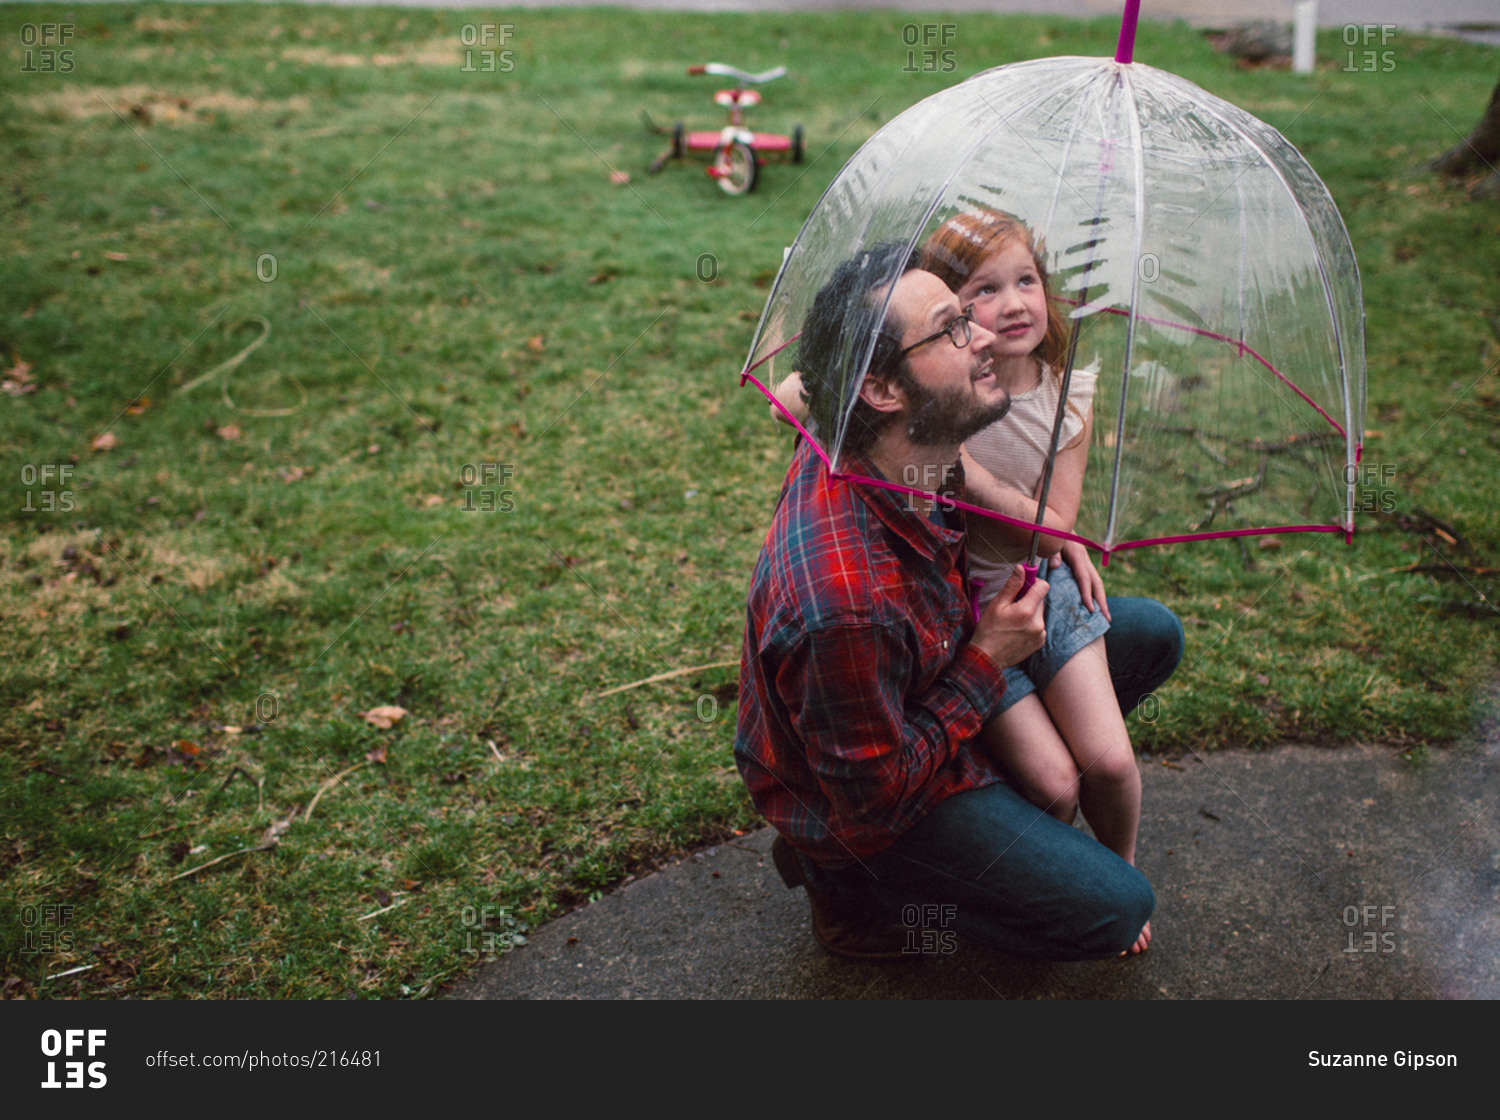 Dad and daughter looking up while underneath umbrella in rain